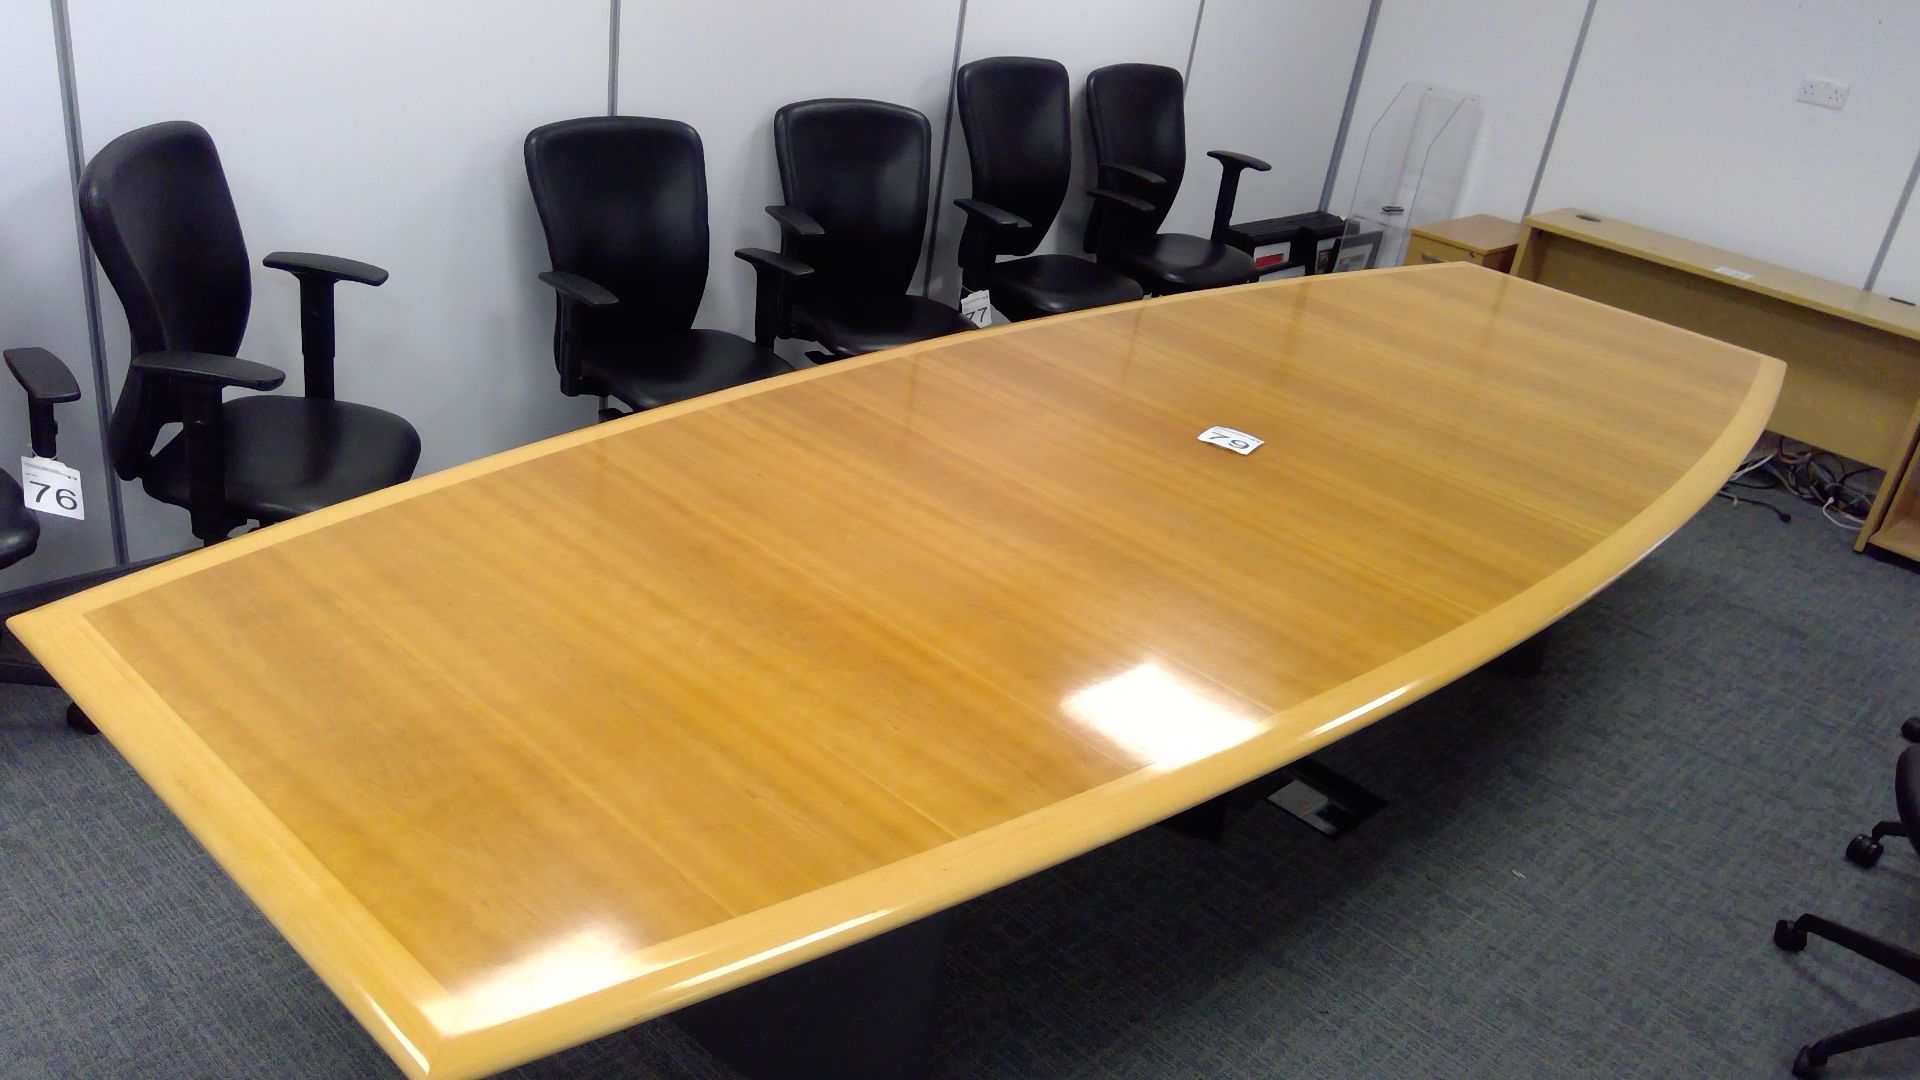 Oak and beech effect 12ft 6inch 2-piece pedestal mounted Boardroom table